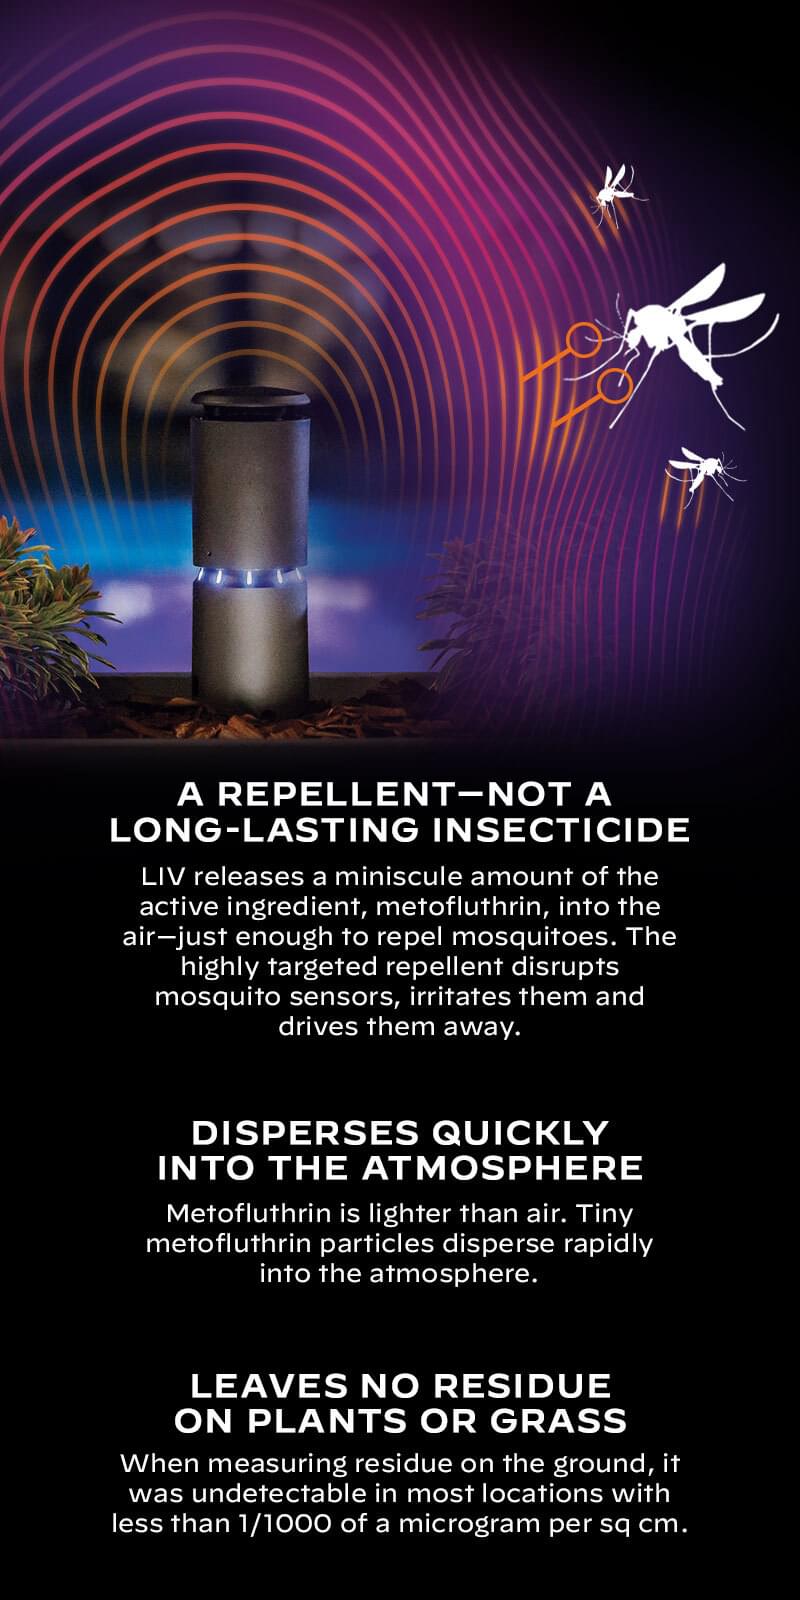 Thermacell repellent is proven to be effective and low impact.